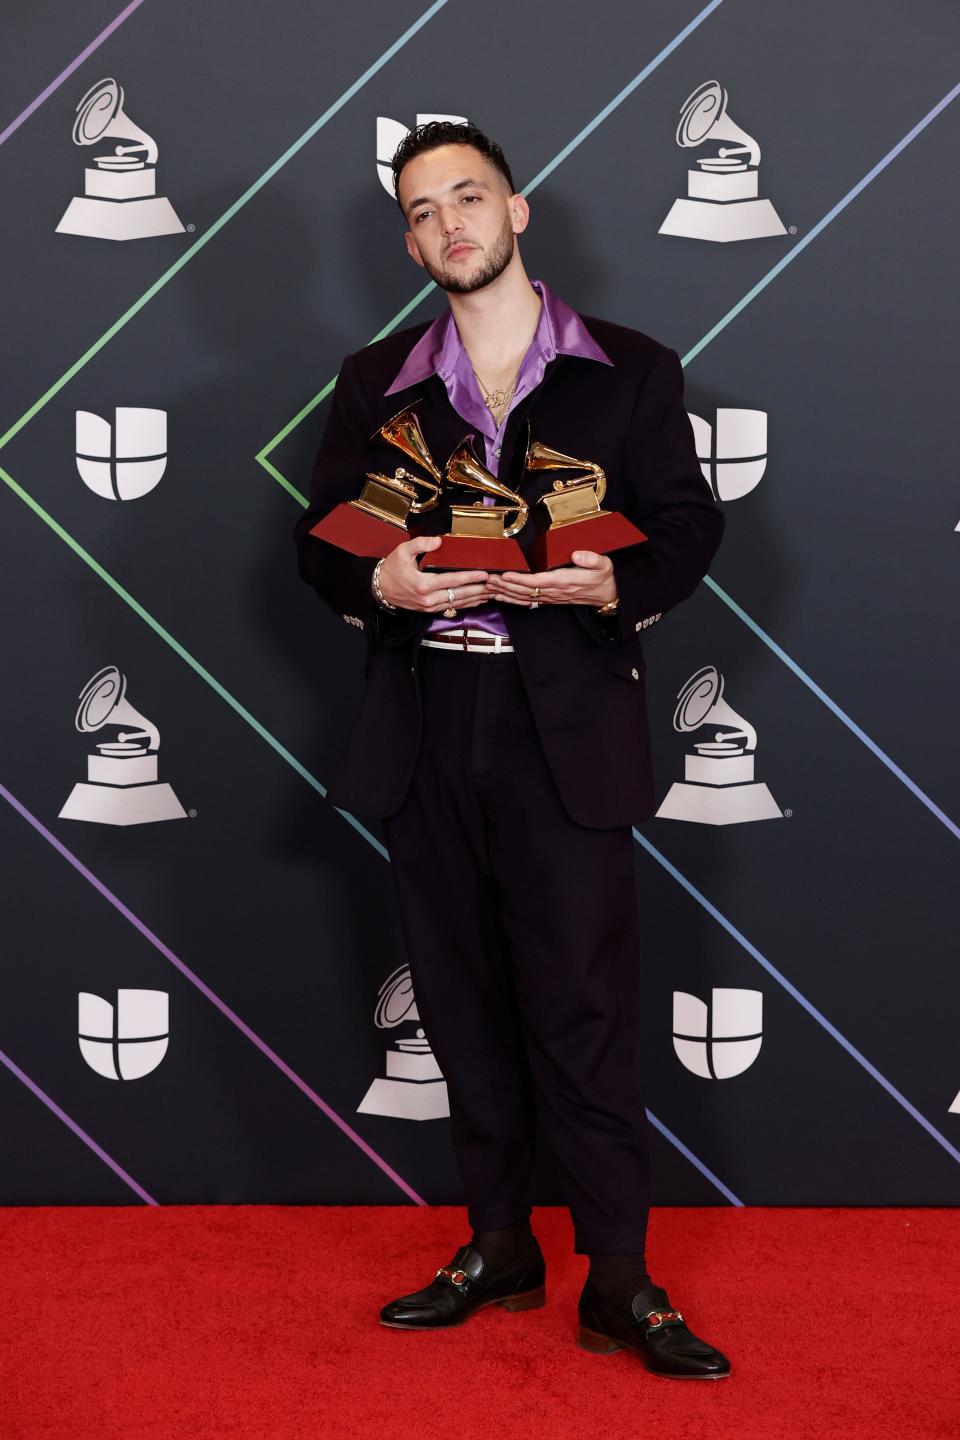 Madrid-bred rapper C. Tangana began his musical career in 2005, but it was 2021's "El Madrileño" that scored him his first top 10 and first entry on any Billboard albums chart.